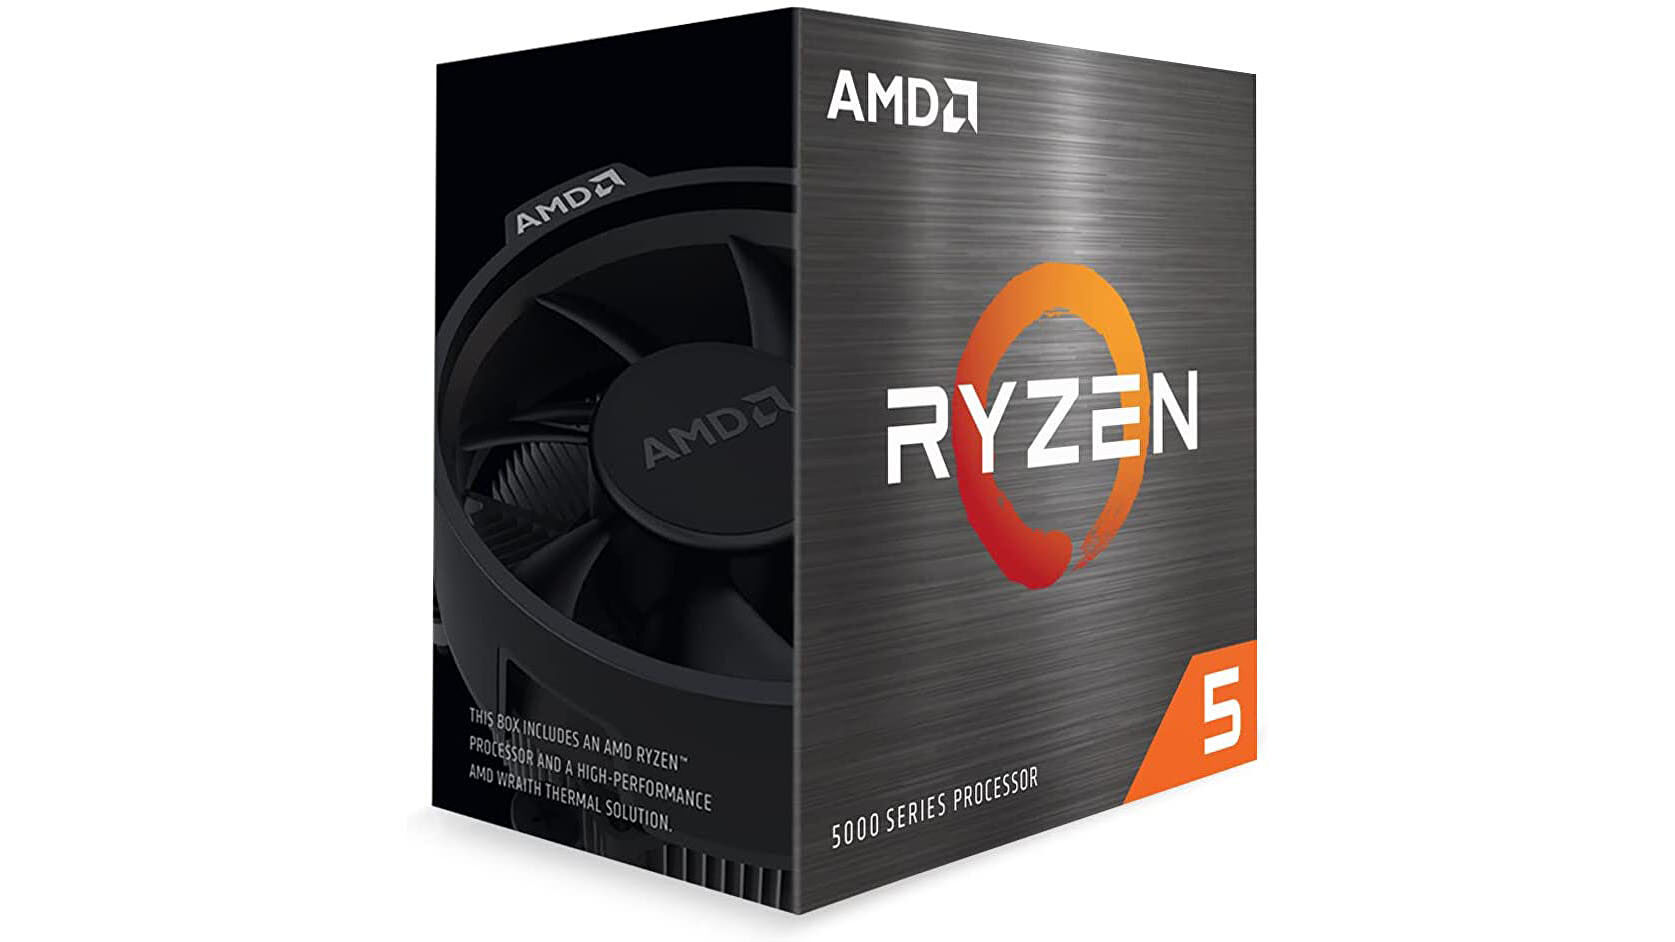 Pick up an AMD Ryzen 5000 CPU and Company of Heroes 3 for £98